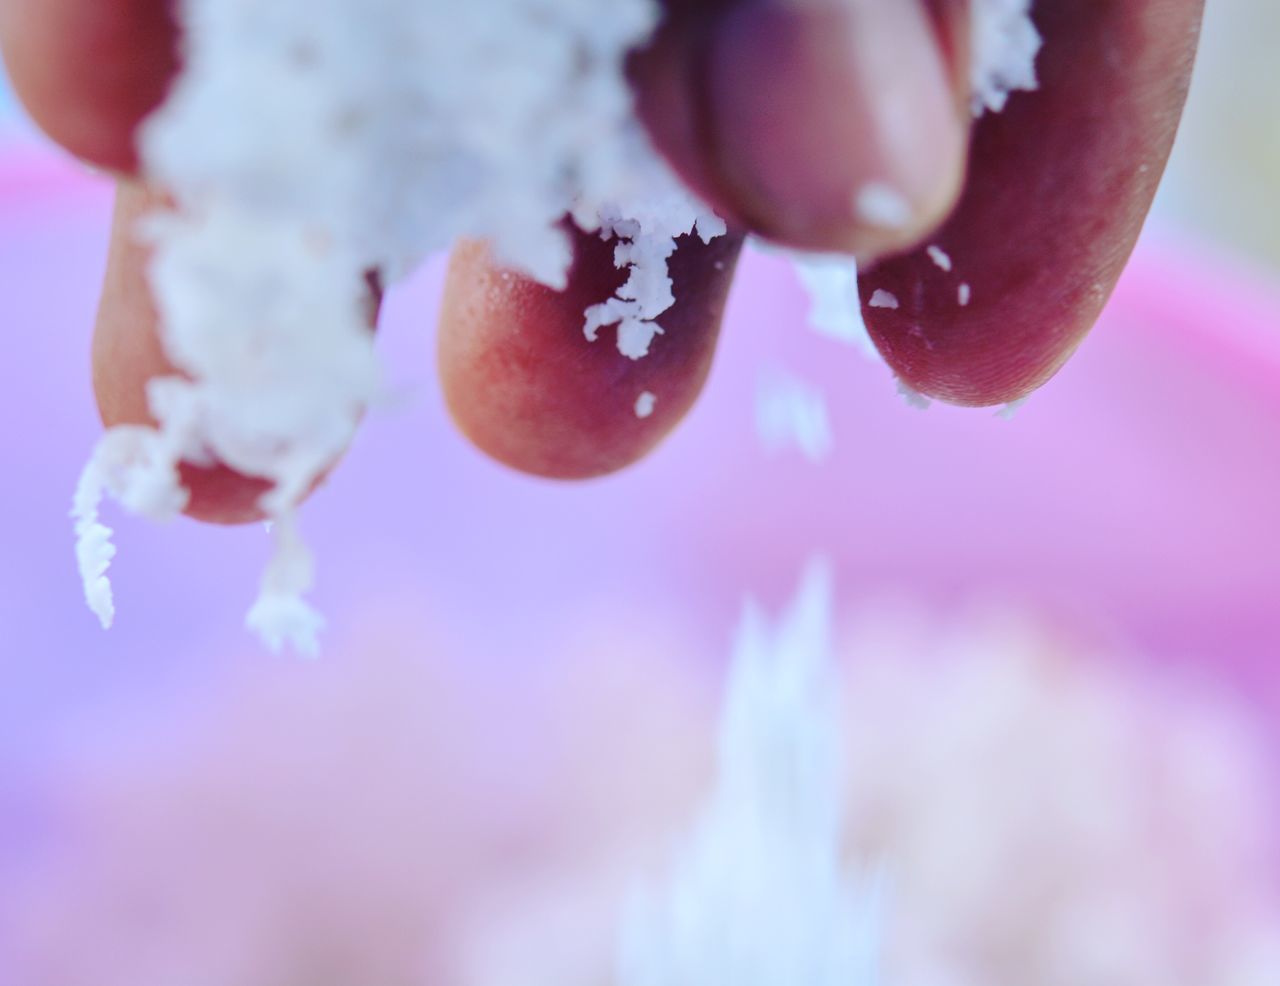 focus on foreground, close-up, freshness, selective focus, frozen, water, growth, nature, person, day, fragility, beauty in nature, purity, human finger